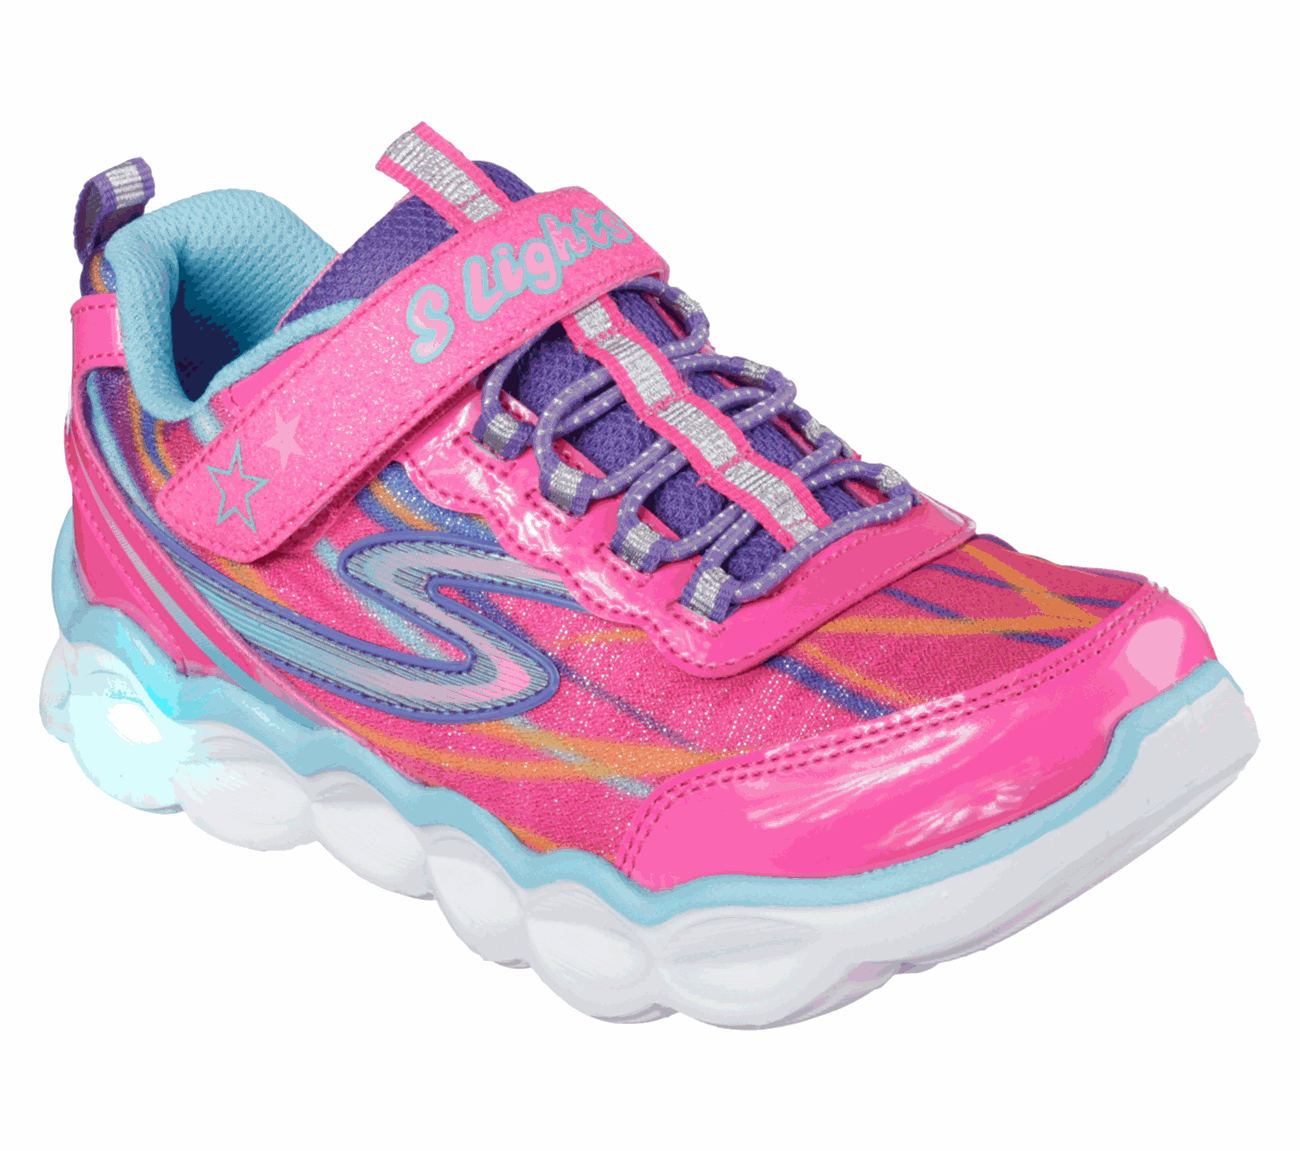 skechers light up shoes price